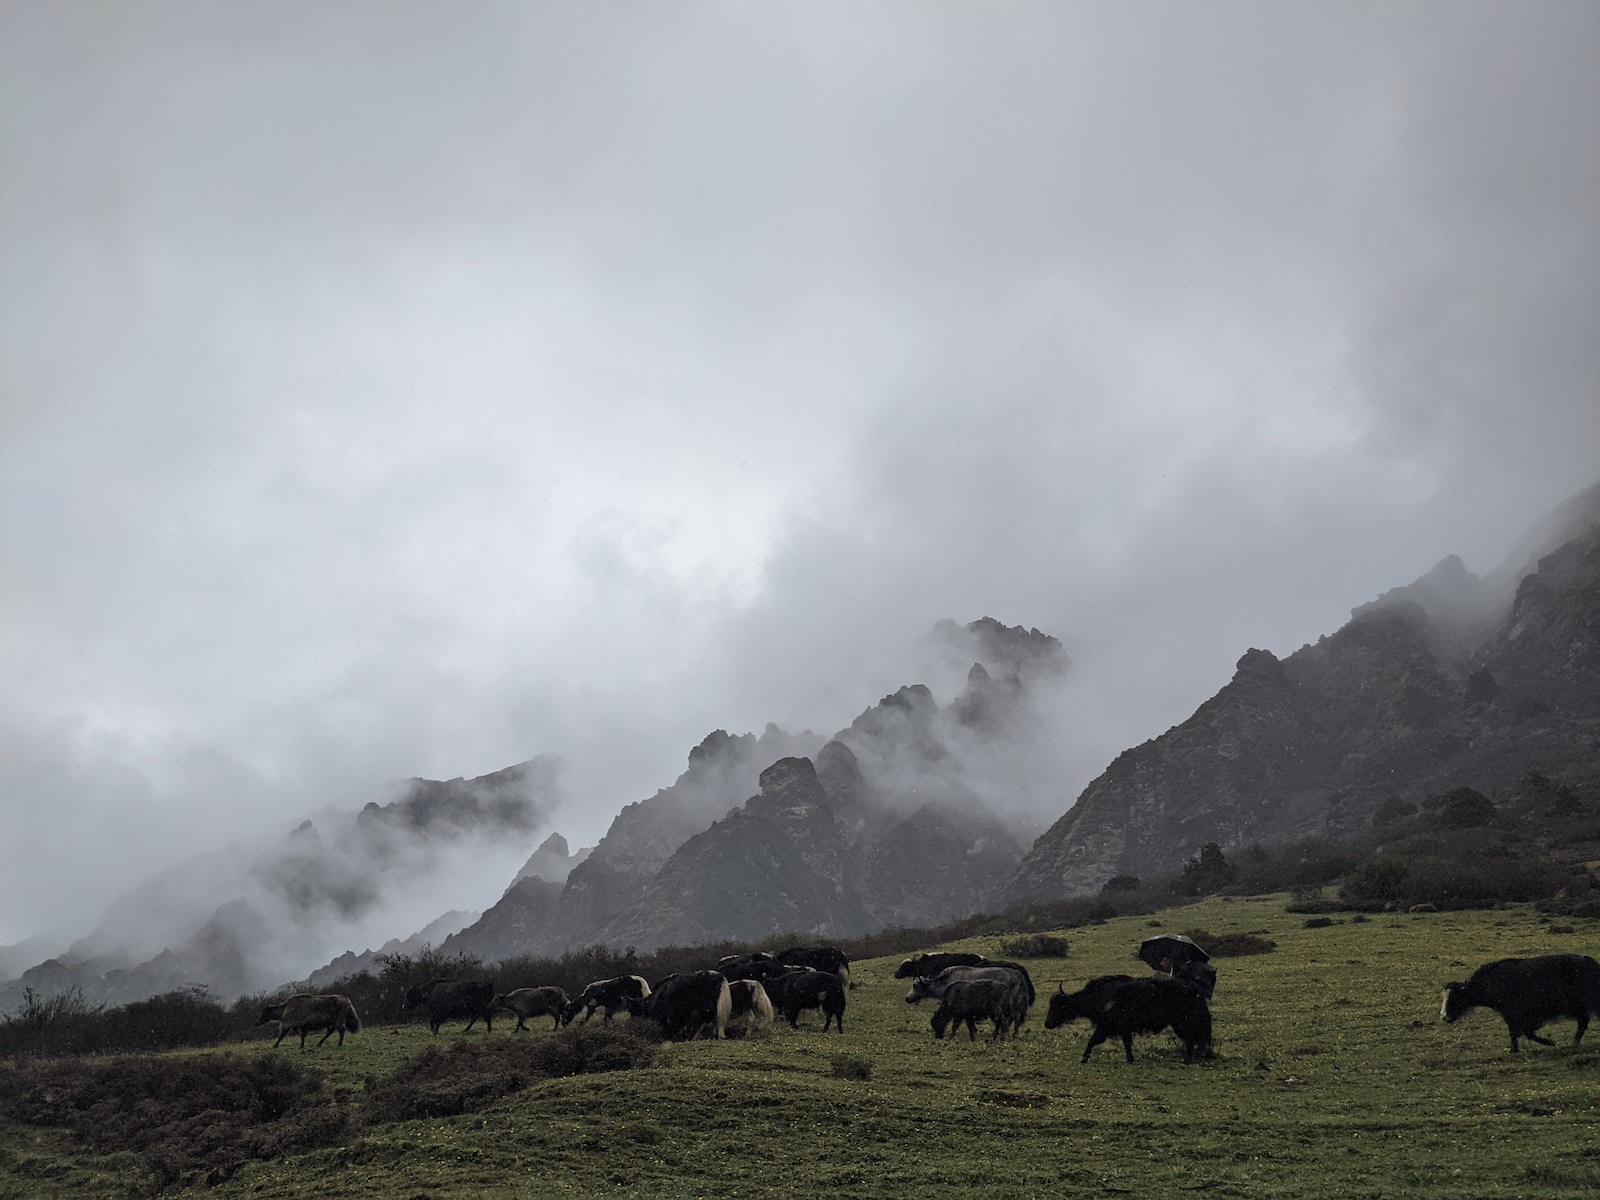 During the second fastpacking trip, we encountered yak herders moving and grazing their animals at 13,000 feet during heavy precipitation.